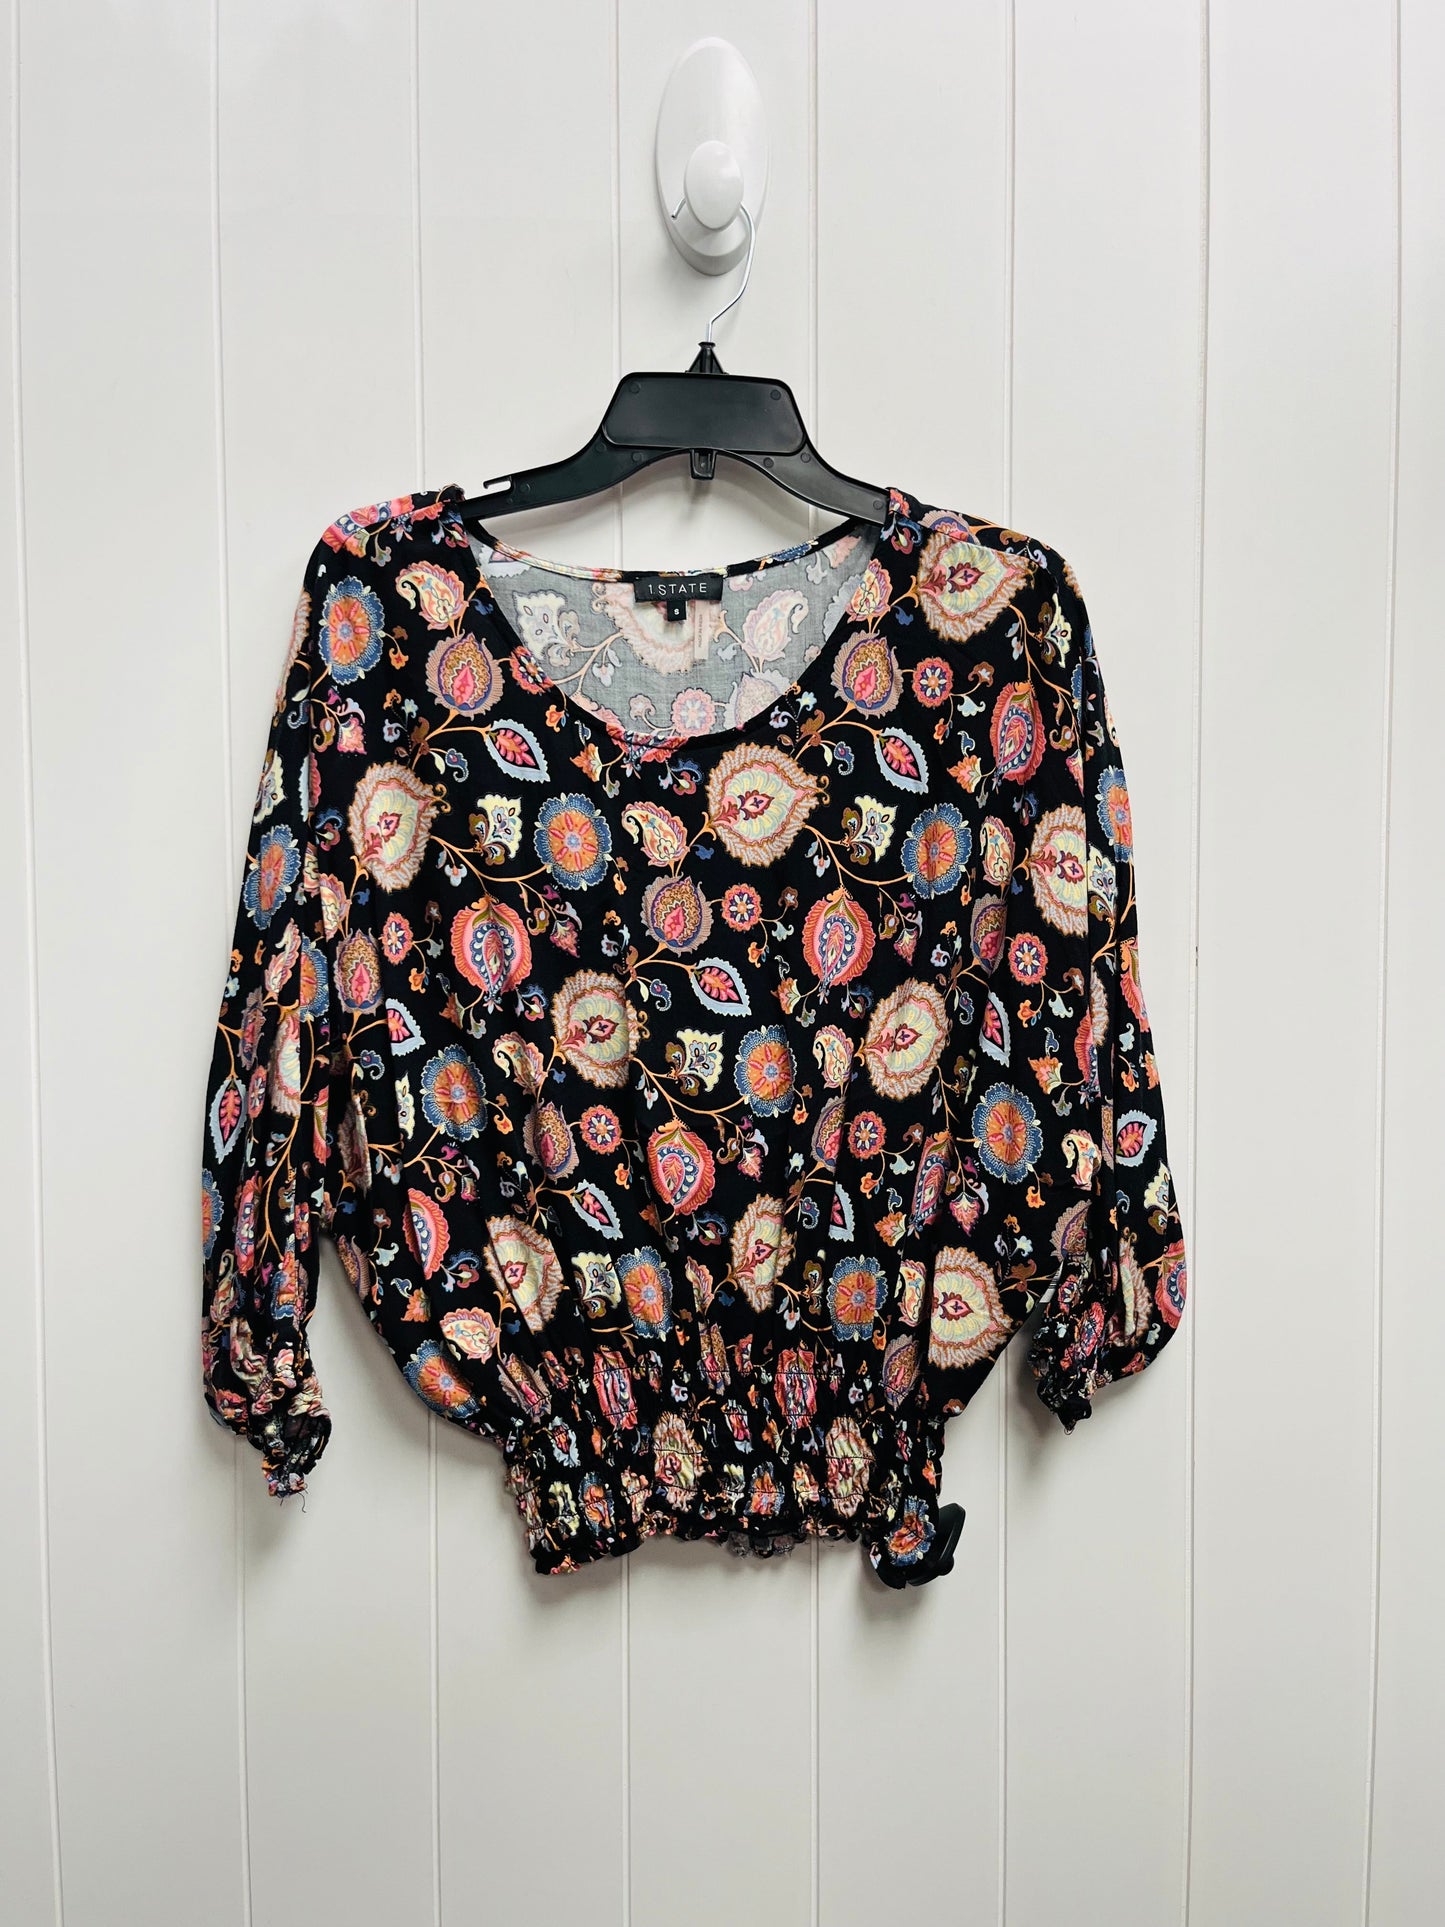 Black & Pink Top Long Sleeve 1.state, Size S